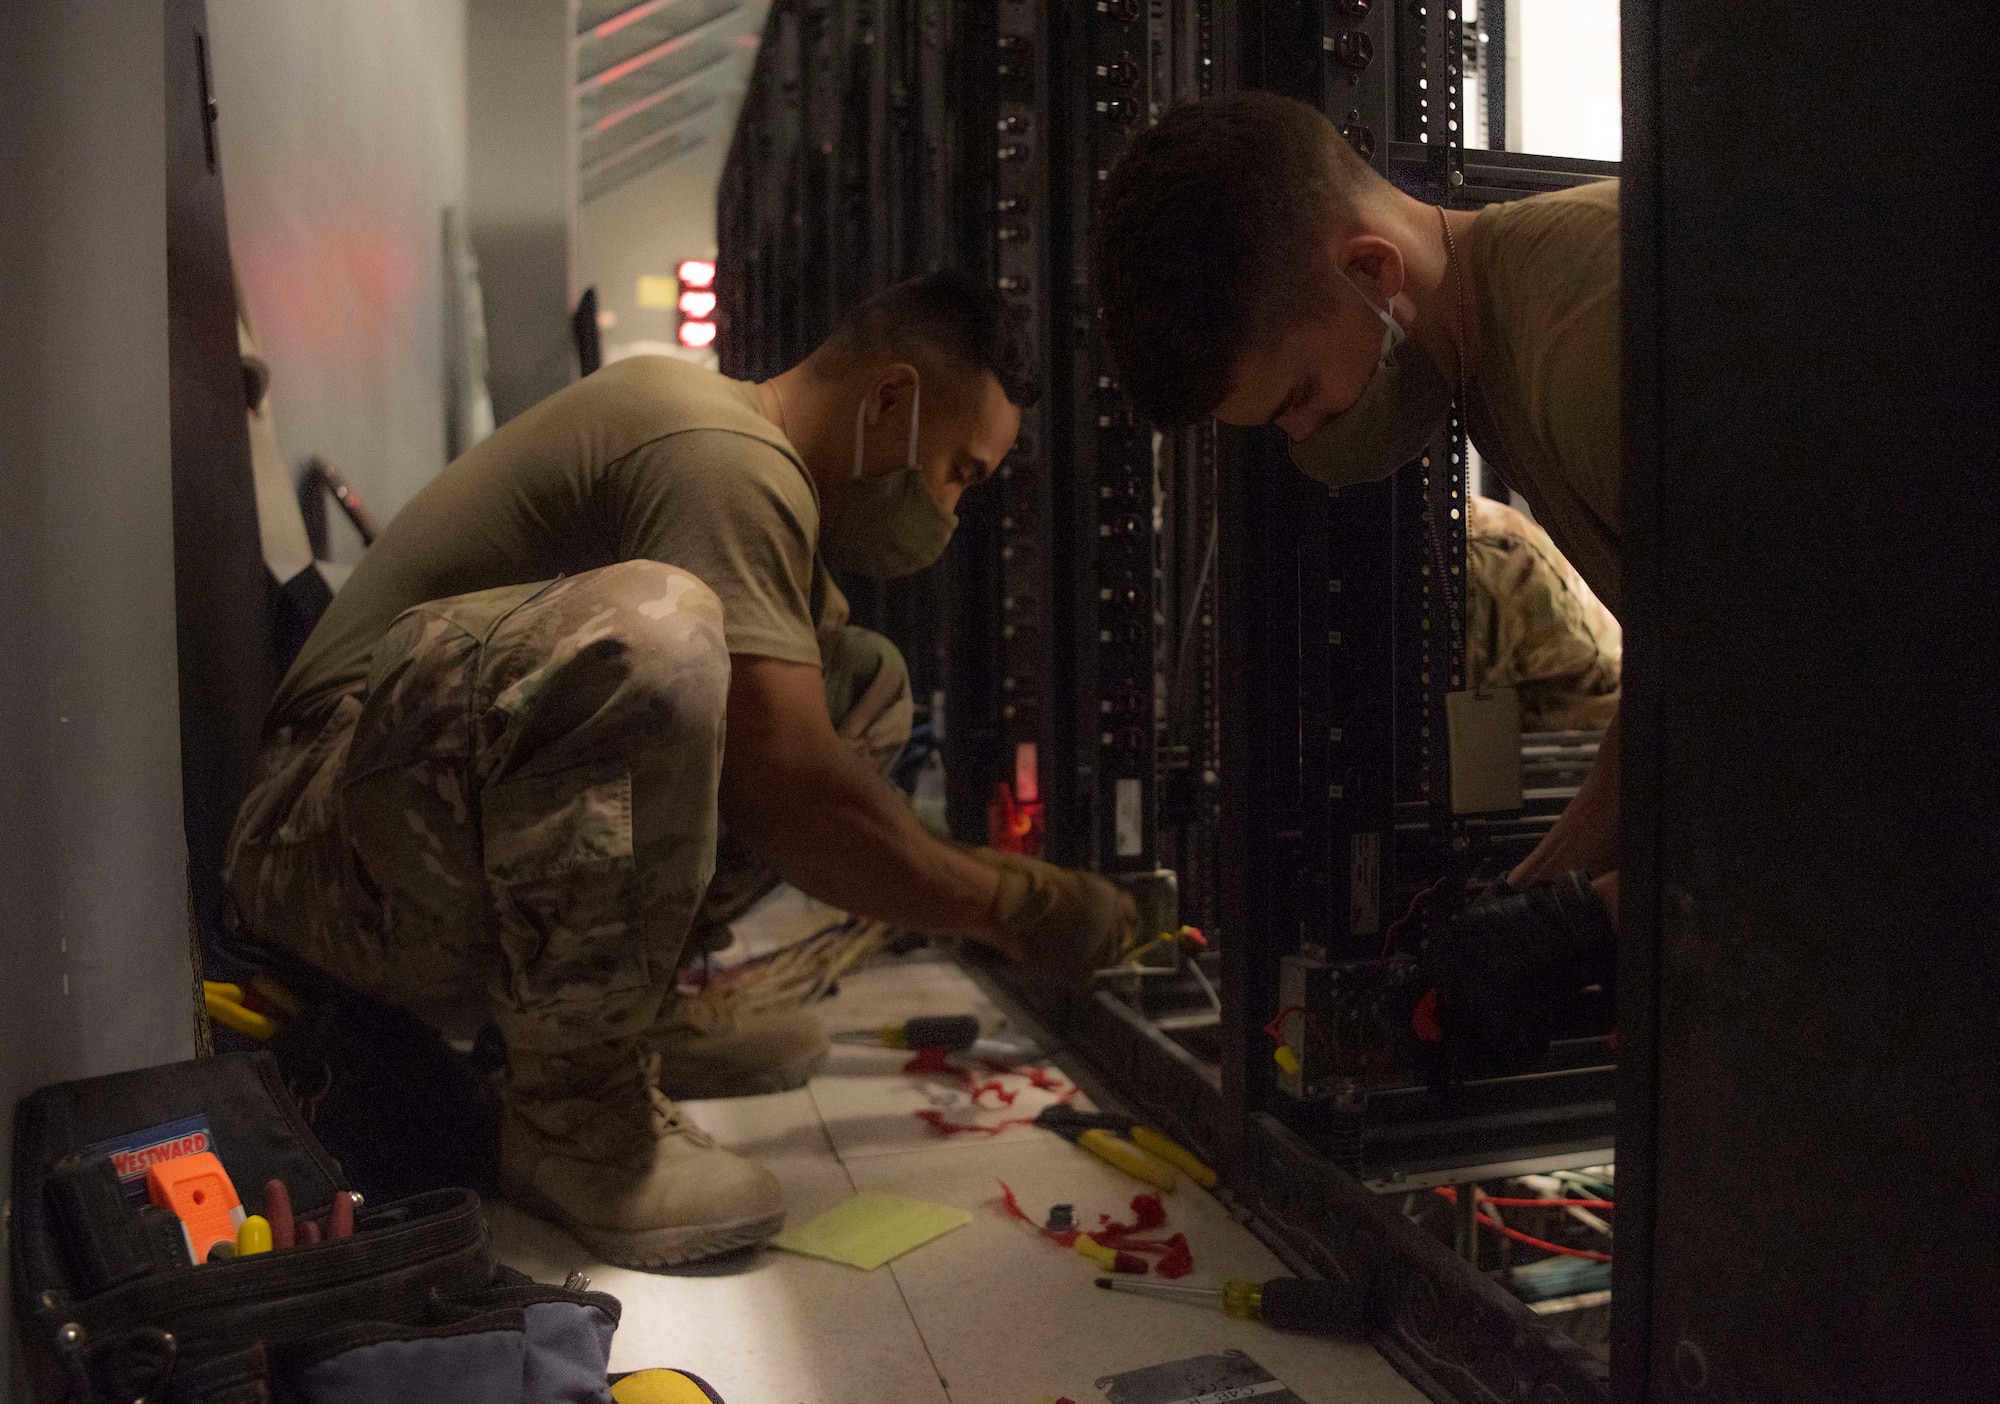 U.S. Air Forces Central Airmen from the Combined Air Operations Center, Al Udeid Air Base, Qatar, set up work stations during facility renovations Nov. 10, 2020.